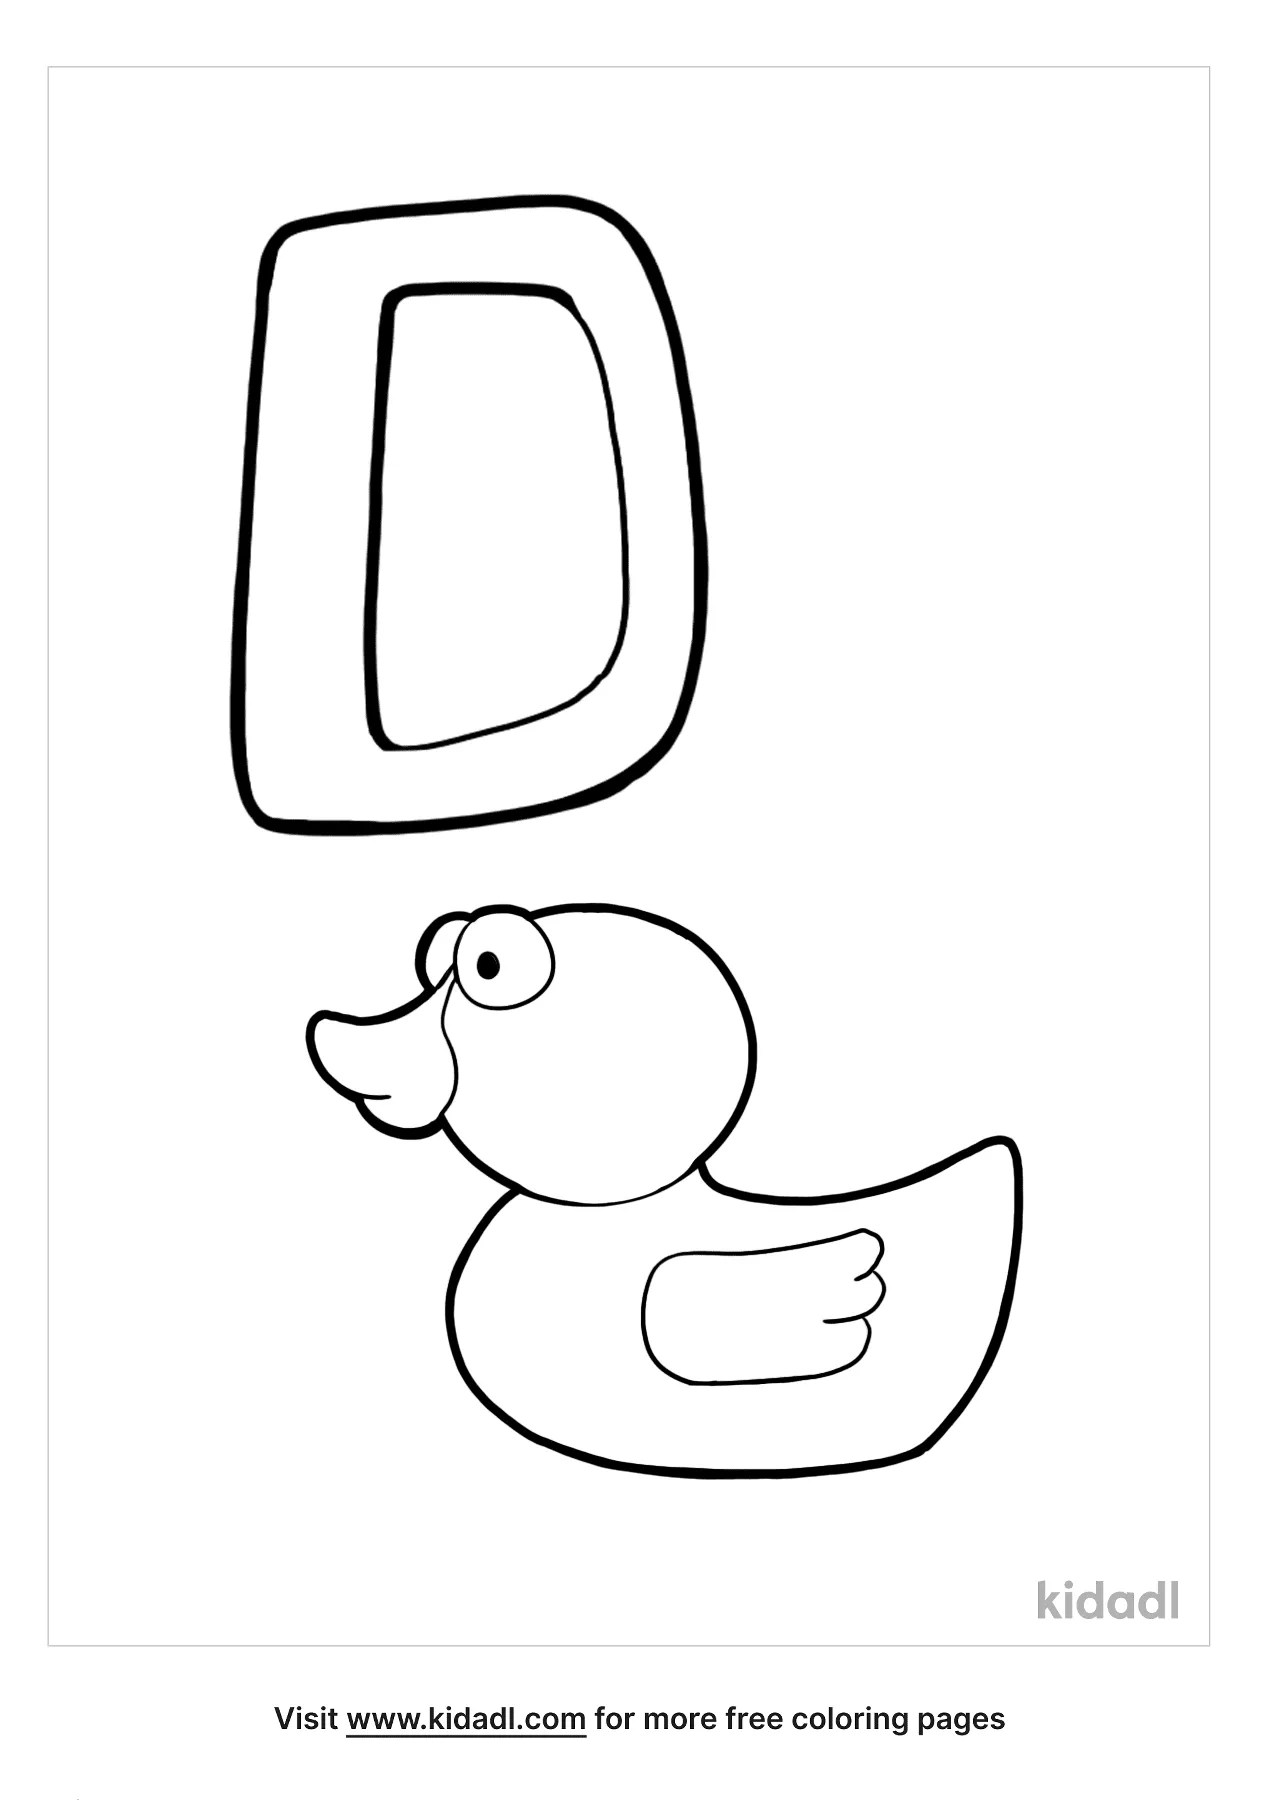 Free Letter D Coloring Page | Coloring Page Printables | Kidadl